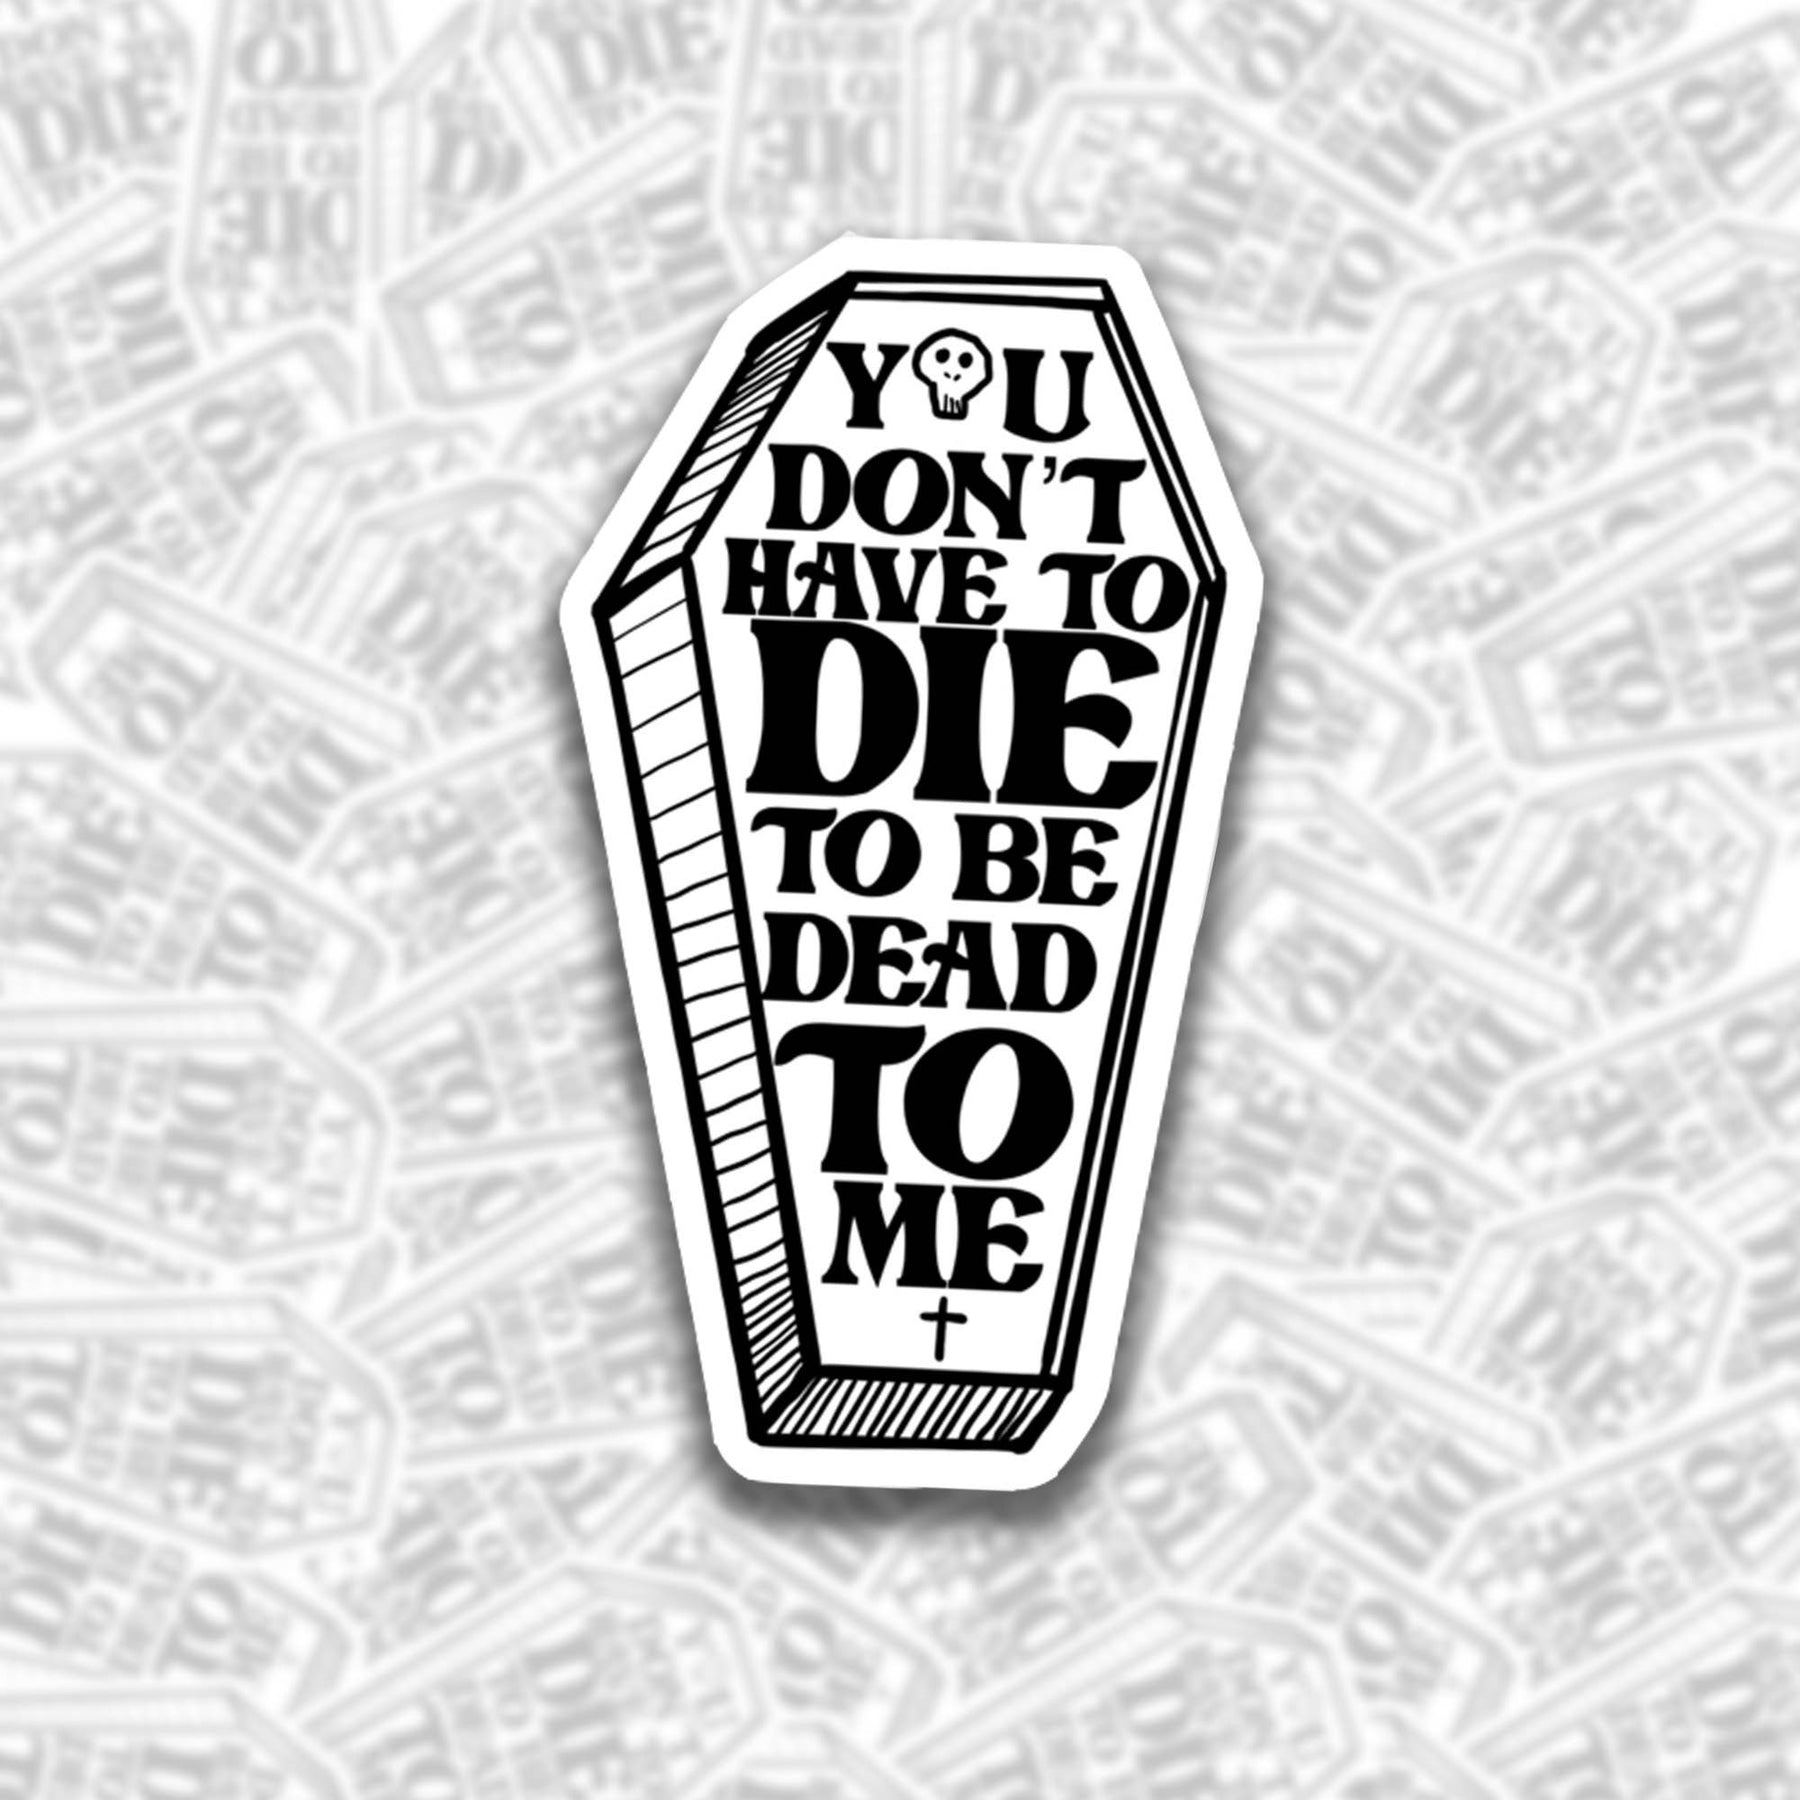 You Don't Have To Die To Be Dead To Me Sticker